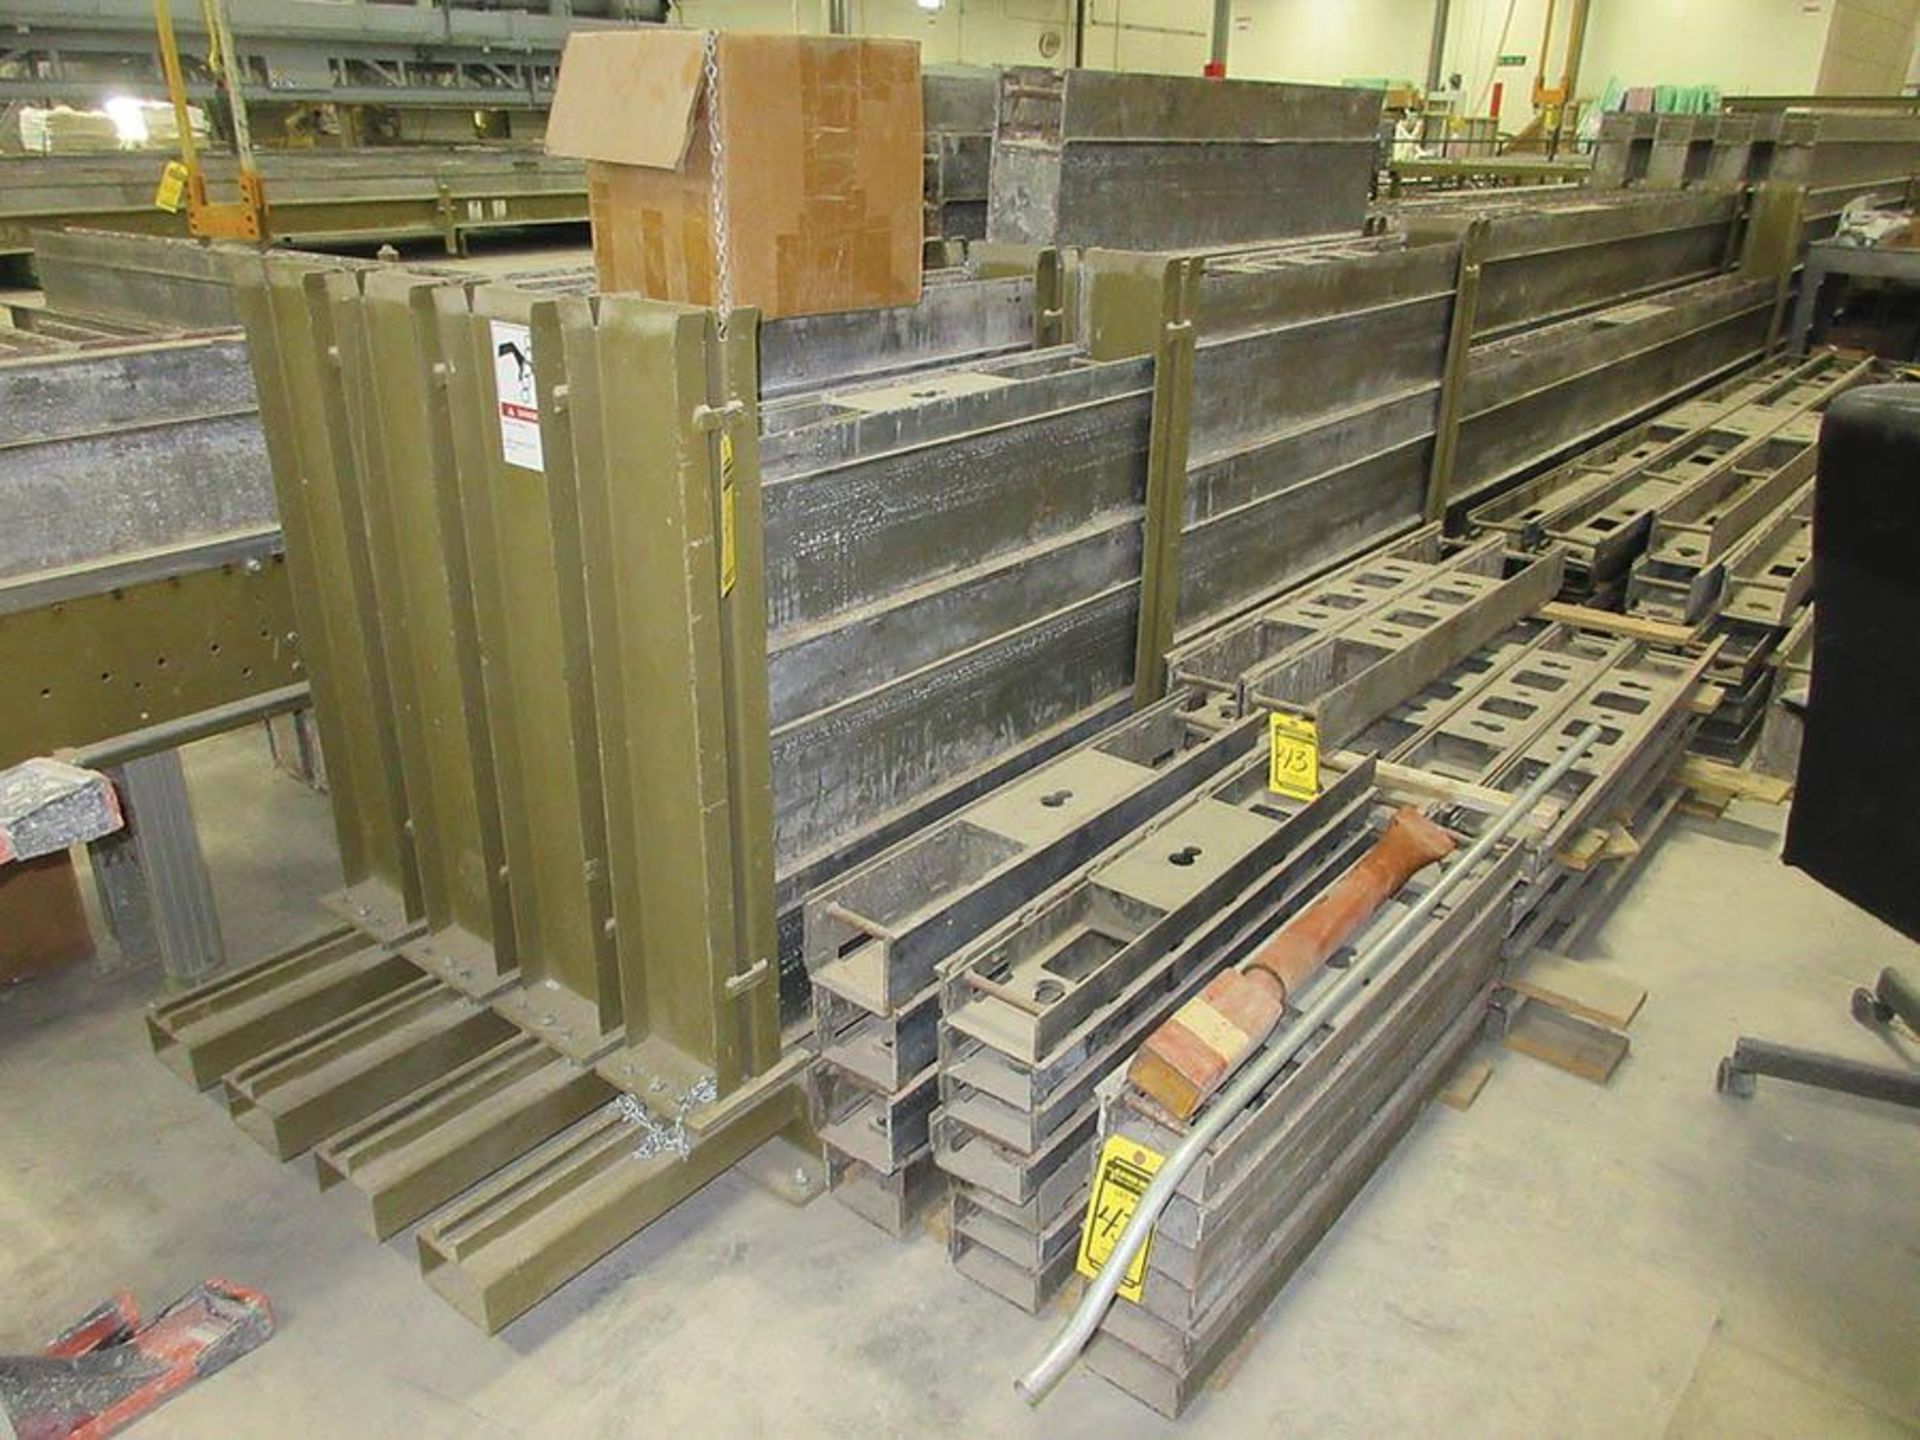 RATEC STEEL FORMS; PALLET CONCRETE FORMS IN VARIOUS SIZES, CASTING PALLETS CAPABLE OF FORMING - Image 9 of 18